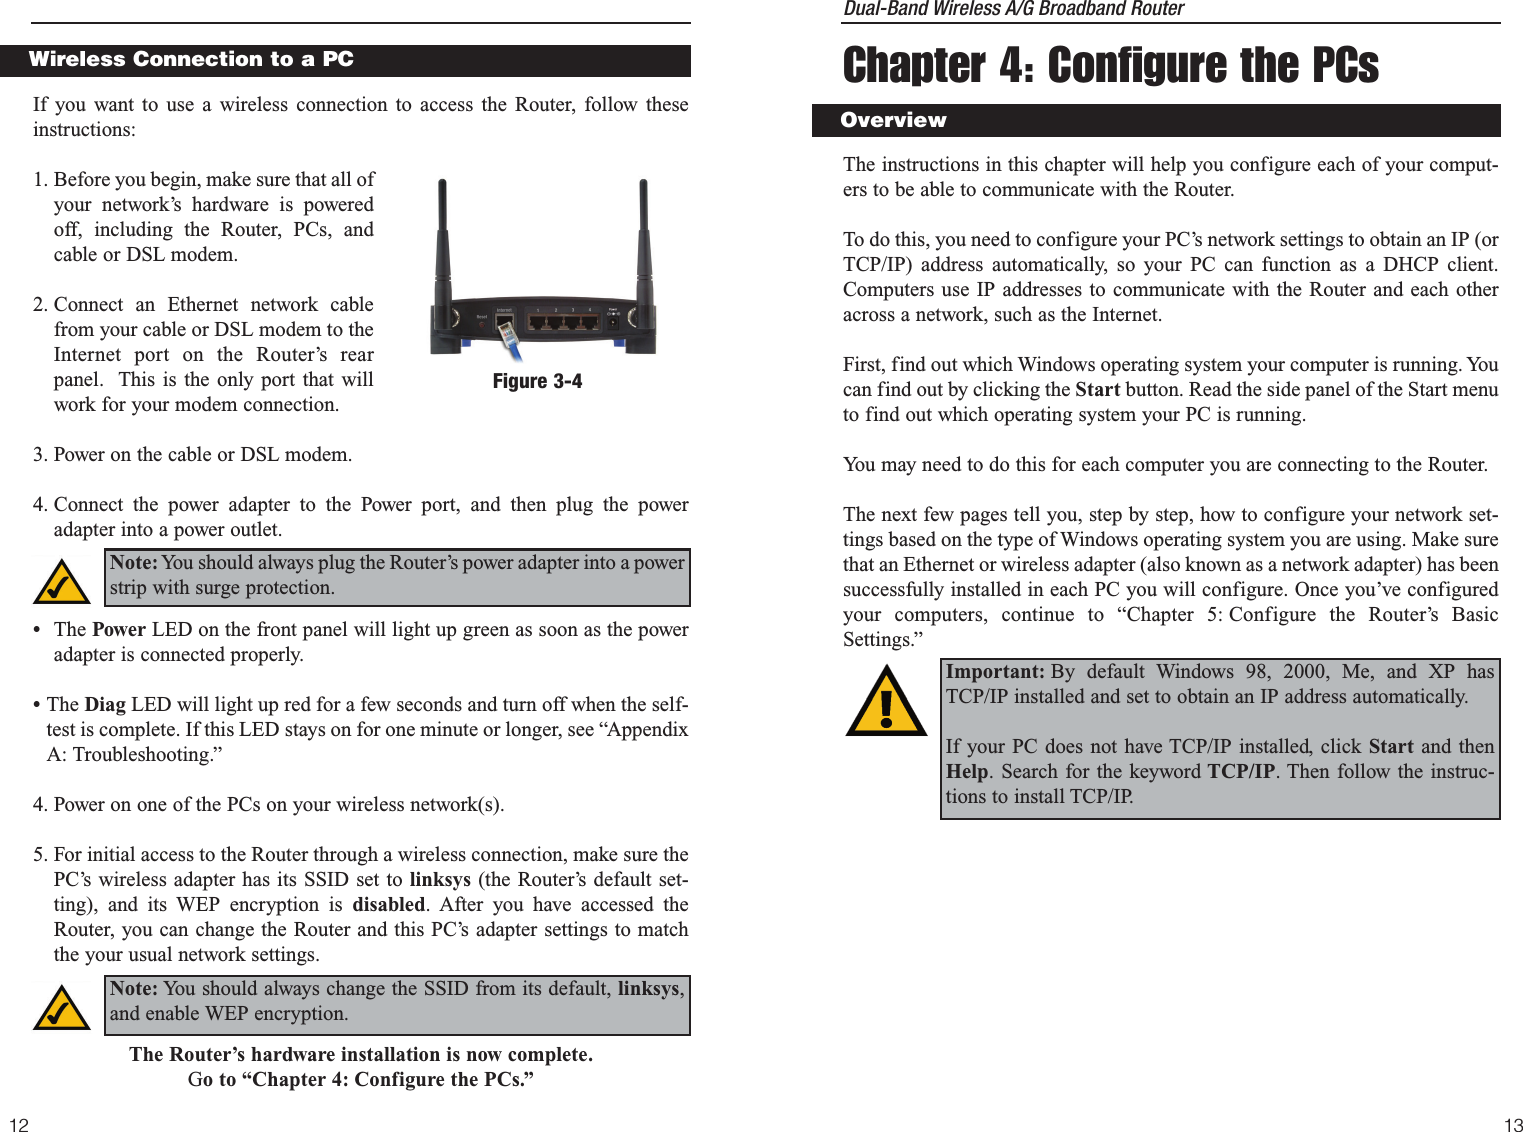 Dual-Band Wireless A/G Broadband Router Chapter 4: Configure the PCsThe instructions in this chapter will help you configure each of your comput-ers to be able to communicate with the Router.To do this, you need to configure your PC’s network settings to obtain an IP (orTCP/IP) address automatically, so your PC can function as a DHCP client.Computers use IP addresses to communicate with the Router and each otheracross a network, such as the Internet. First, find out which Windows operating system your computer is running. Youcan find out by clicking the Start button. Read the side panel of the Start menuto find out which operating system your PC is running.You may need to do this for each computer you are connecting to the Router.The next few pages tell you, step by step, how to configure your network set-tings based on the type of Windows operating system you are using. Make surethat an Ethernet or wireless adapter (also known as a network adapter) has beensuccessfully installed in each PC you will configure. Once you’ve configuredyour computers, continue to “Chapter 5: Configure the Router’s BasicSettings.” 1312Important: By default Windows 98, 2000, Me, and XP hasTCP/IP installed and set to obtain an IP address automatically. If your PC does not have TCP/IP installed, click Start and thenHelp. Search for the keyword TCP/IP. Then follow the instruc-tions to install TCP/IP.OverviewIf you want to use a wireless connection to access the Router, follow theseinstructions:1. Before you begin, make sure that all ofyour network’s hardware is poweredoff, including the Router, PCs, andcable or DSL modem.2. Connect an Ethernet network cablefrom your cable or DSL modem to theInternet port on the Router’s rearpanel.  This is the only port that willwork for your modem connection. 3. Power on the cable or DSL modem. 4. Connect the power adapter to the Power port, and then plug the poweradapter into a power outlet.  •The Power LED on the front panel will light up green as soon as the poweradapter is connected properly.•The Diag LED will light up red for a few seconds and turn off when the self-test is complete. If this LED stays on for one minute or longer, see “AppendixA: Troubleshooting.”4. Power on one of the PCs on your wireless network(s).5. For initial access to the Router through a wireless connection, make sure thePC’s wireless adapter has its SSID set to linksys (the Router’s default set-ting), and its WEP encryption is disabled. After you have accessed theRouter, you can change the Router and this PC’s adapter settings to matchthe your usual network settings.The Router’s hardware installation is now complete.Go to “Chapter 4: Configure the PCs.”Wireless Connection to a PCNote: You should always plug the Router’s power adapter into a powerstrip with surge protection.Figure 3-4Note: You should always change the SSID from its default, linksys,and enable WEP encryption.